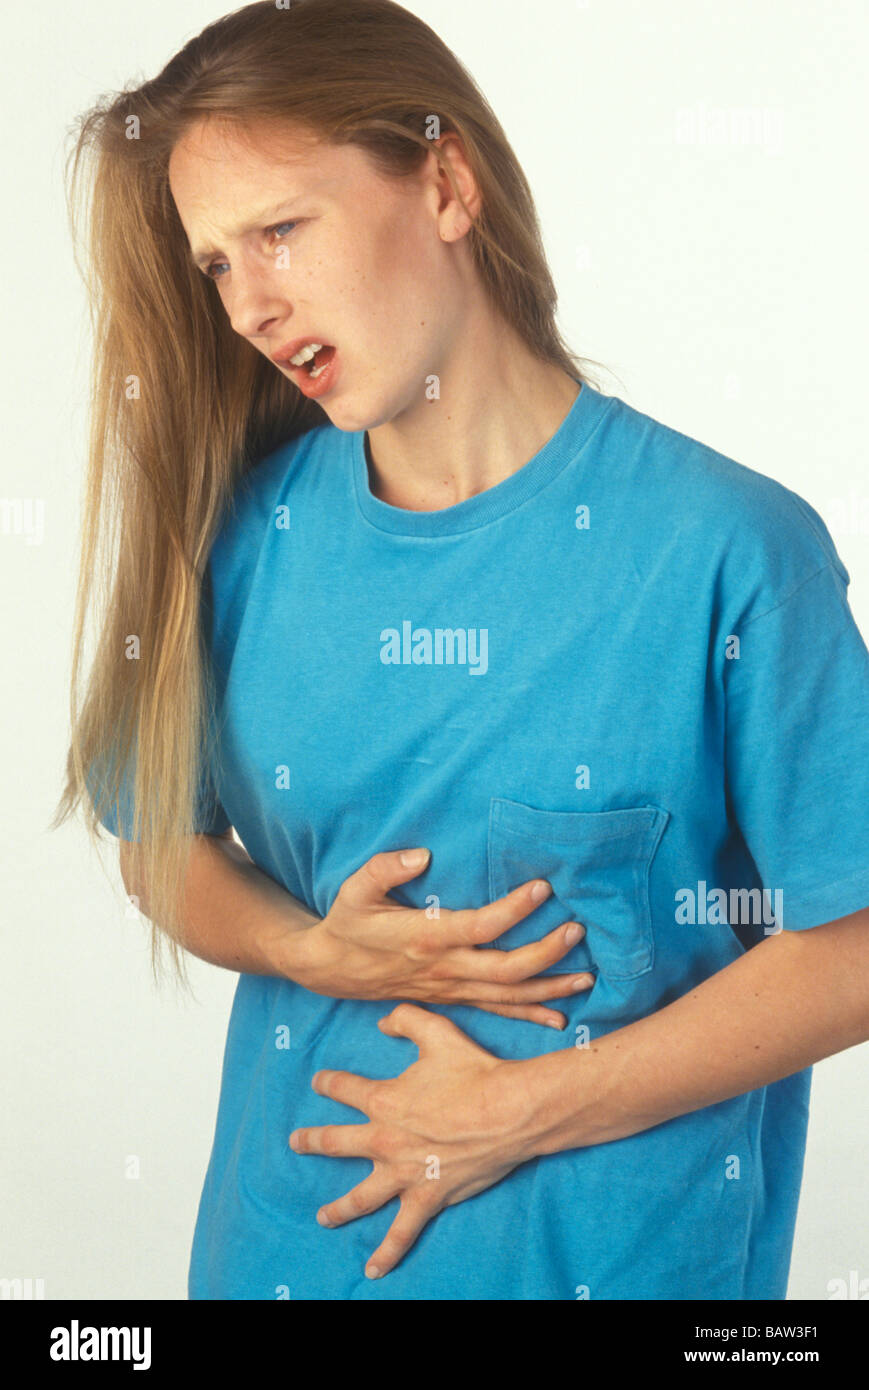 woman with indigestion or tummy ache Stock Photo